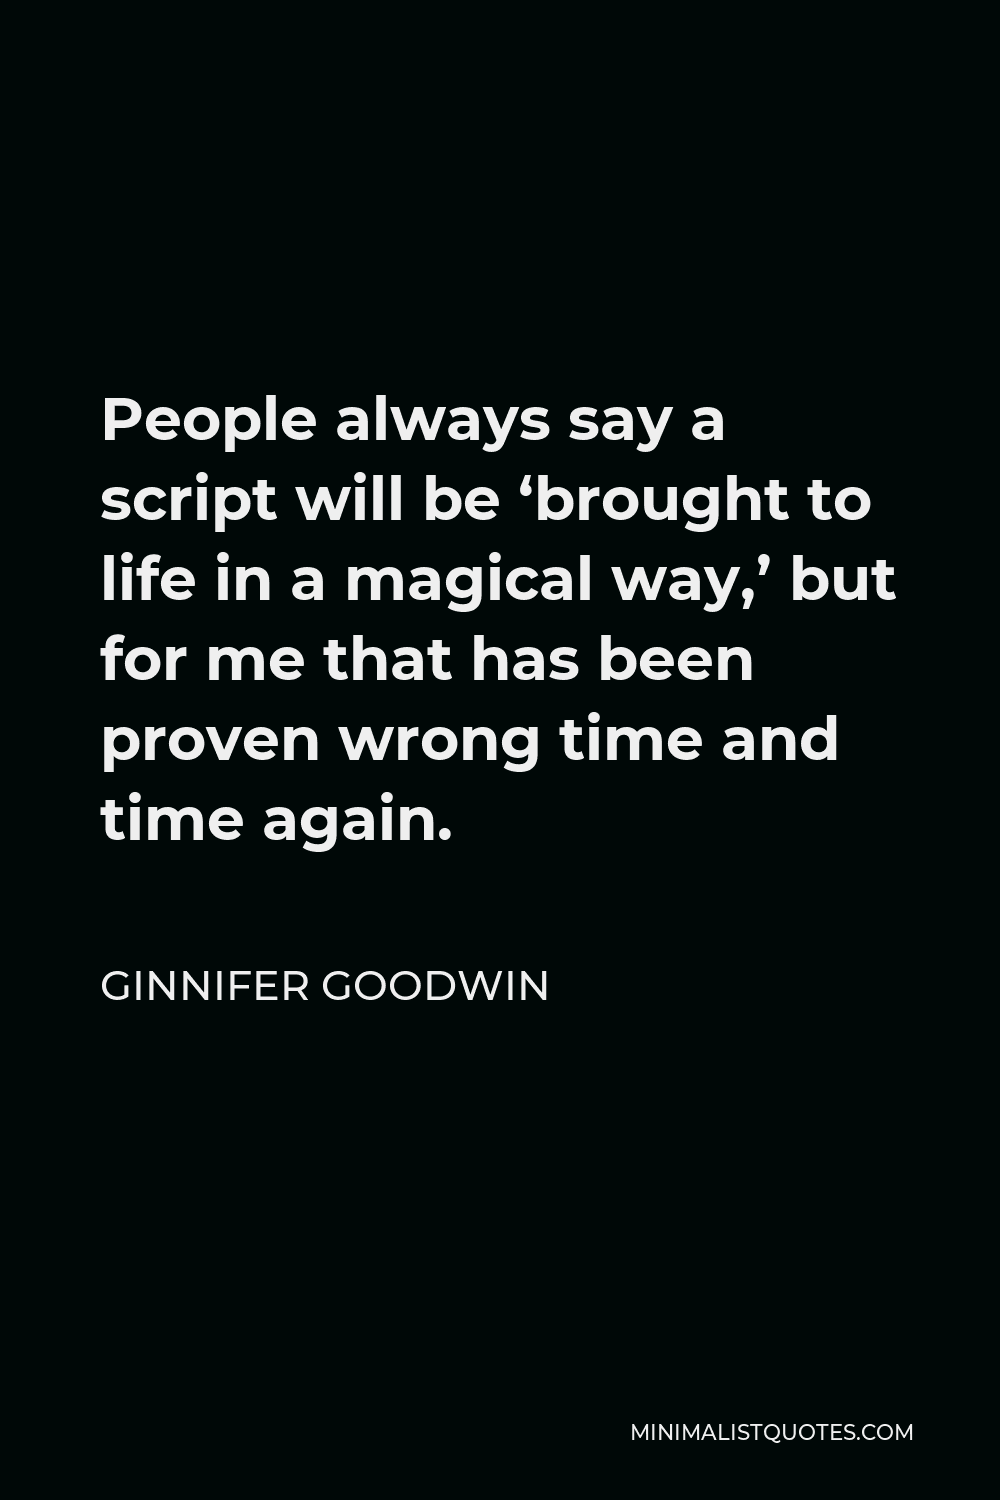 Ginnifer Goodwin Quote - People always say a script will be ‘brought to life in a magical way,’ but for me that has been proven wrong time and time again.